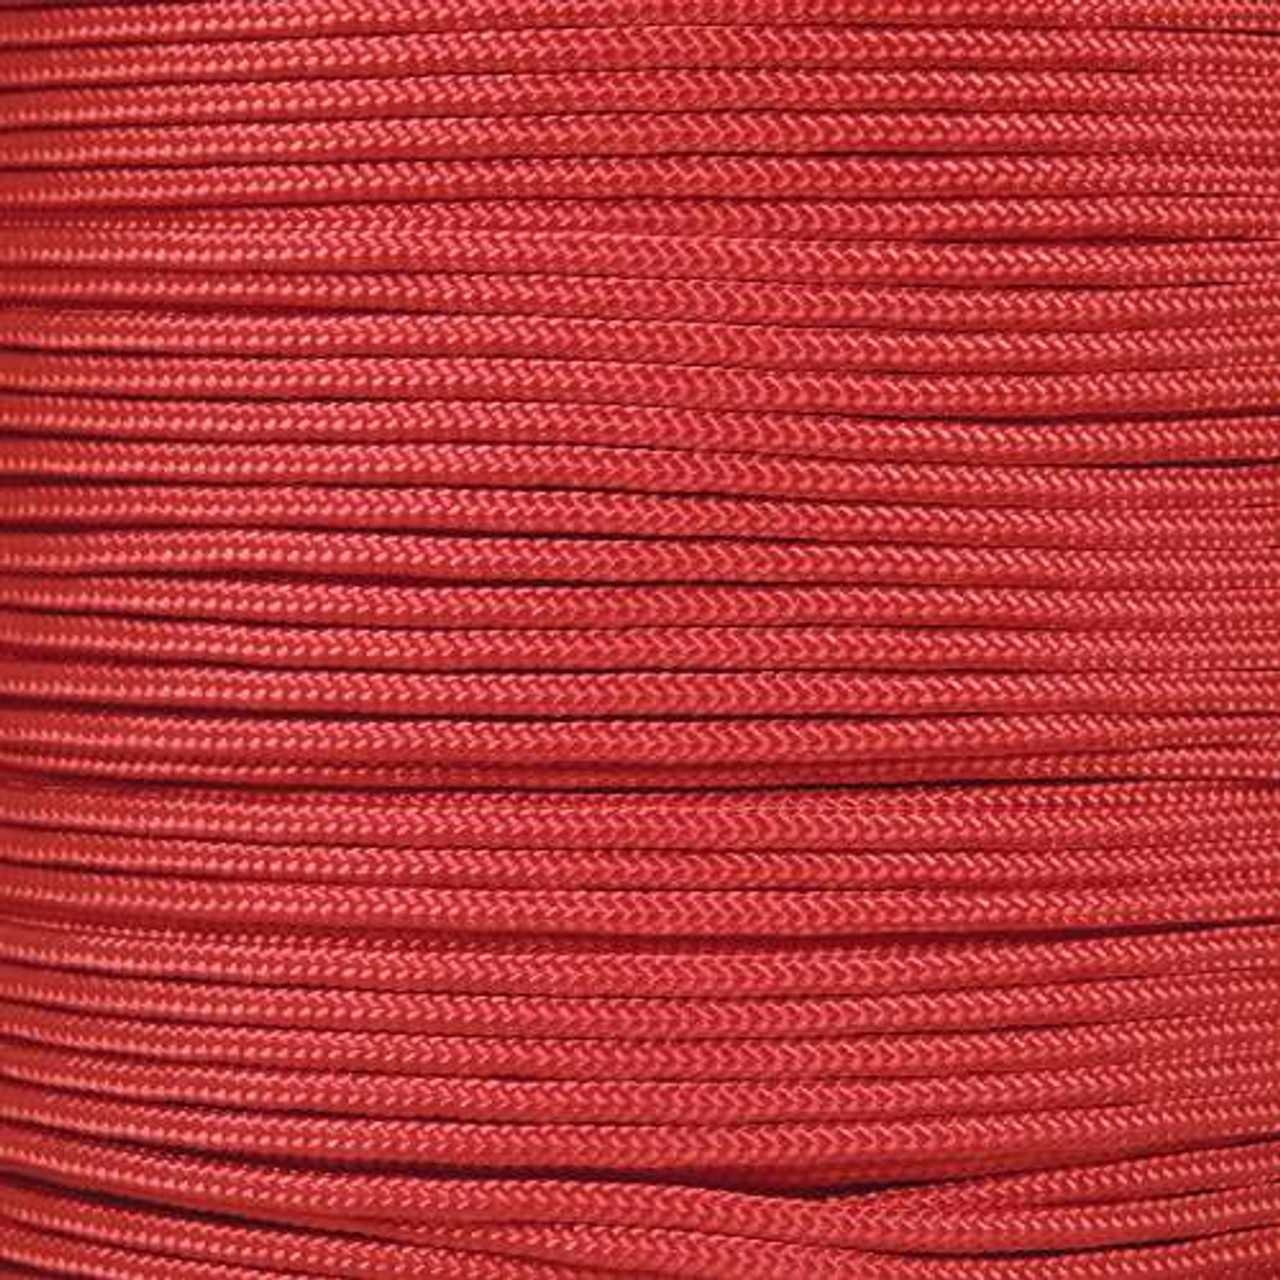 Imperial Red 425 Paracord (3-Strand) - Spools